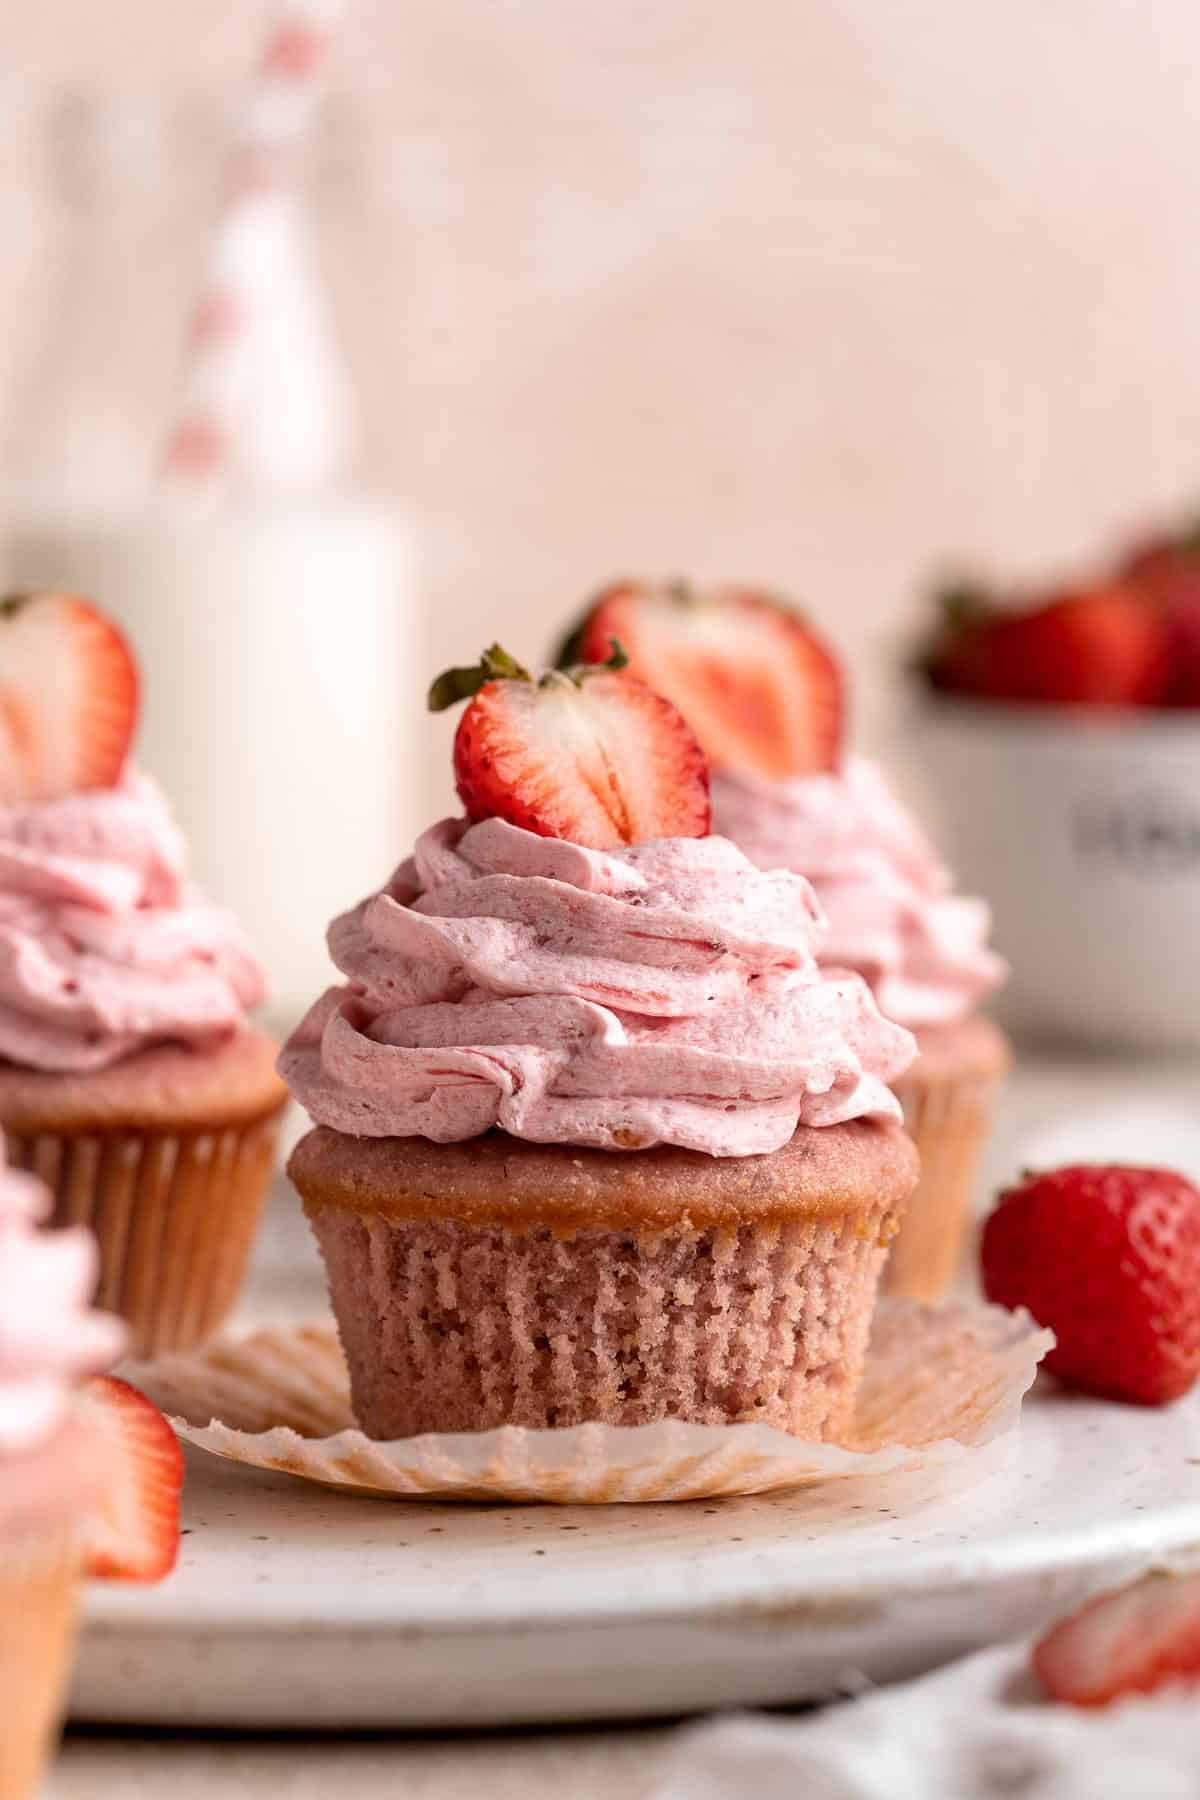 Strawberry Cupcakes are made with real strawberries in both the tender cake batter and the creamy strawberry buttercream frosting. A picture-perfect treat! | aheadofthyme.com